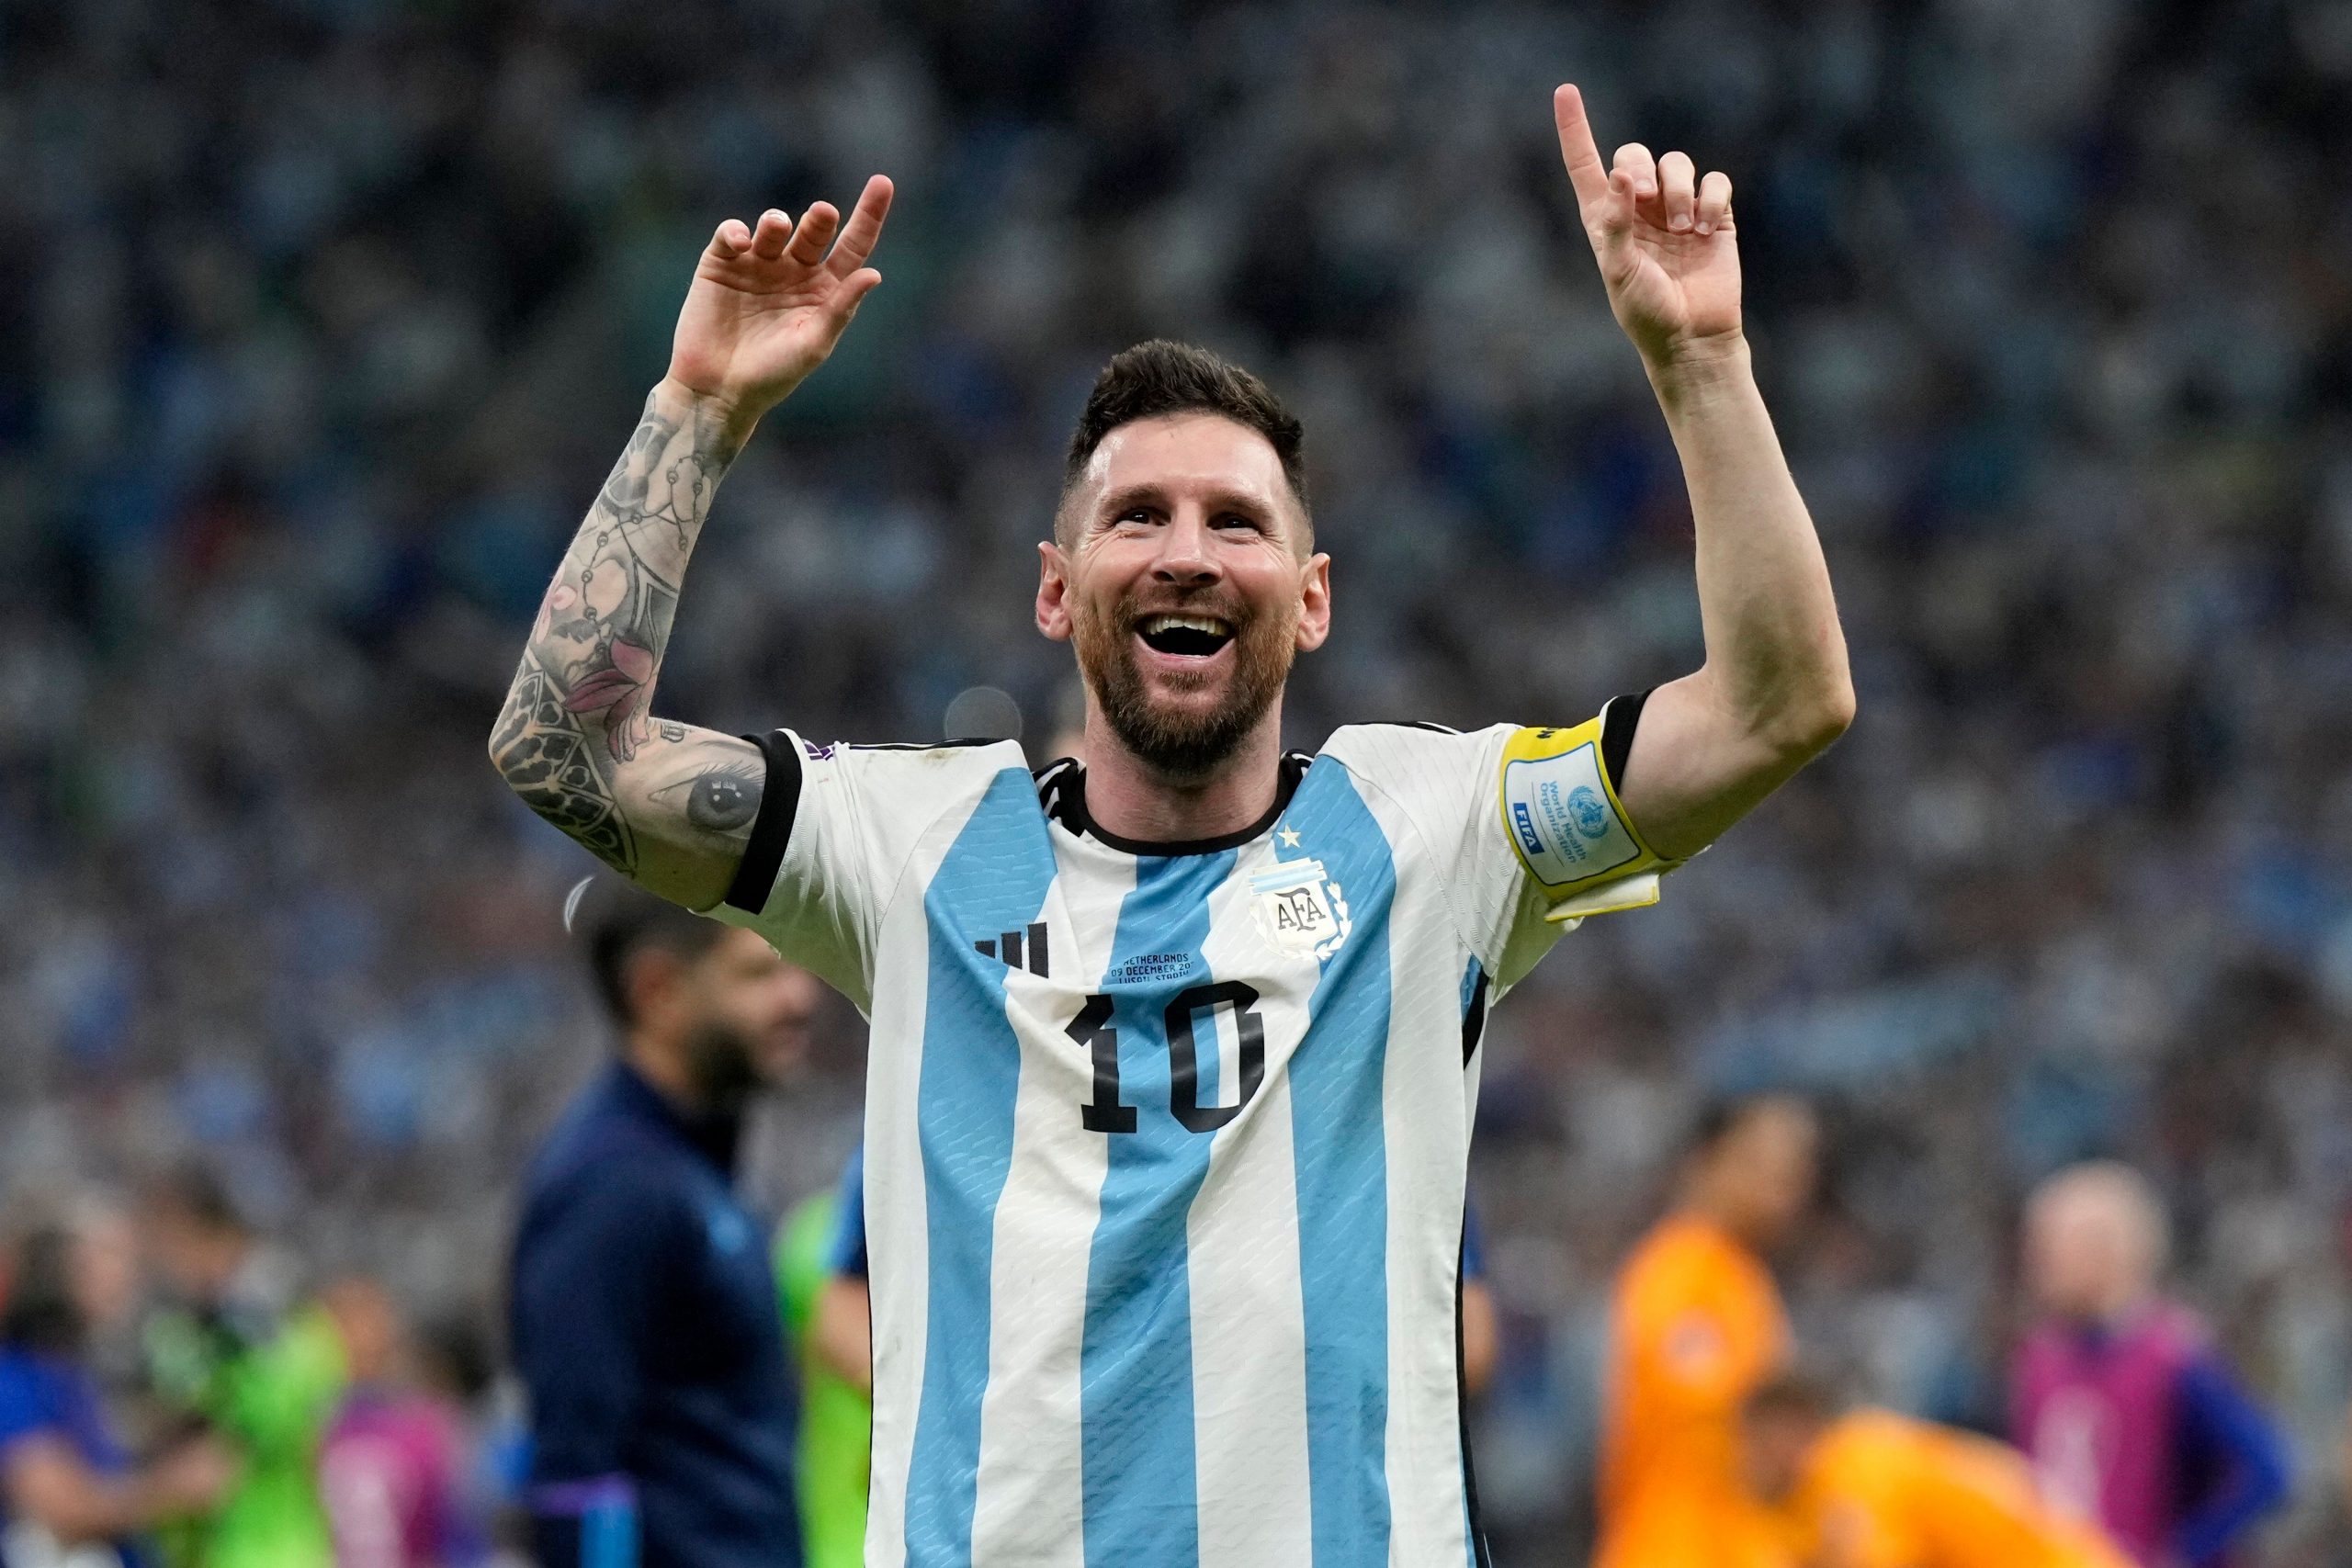 Lionel Messi equals Diego Maradona’s record for most assists in World Cups